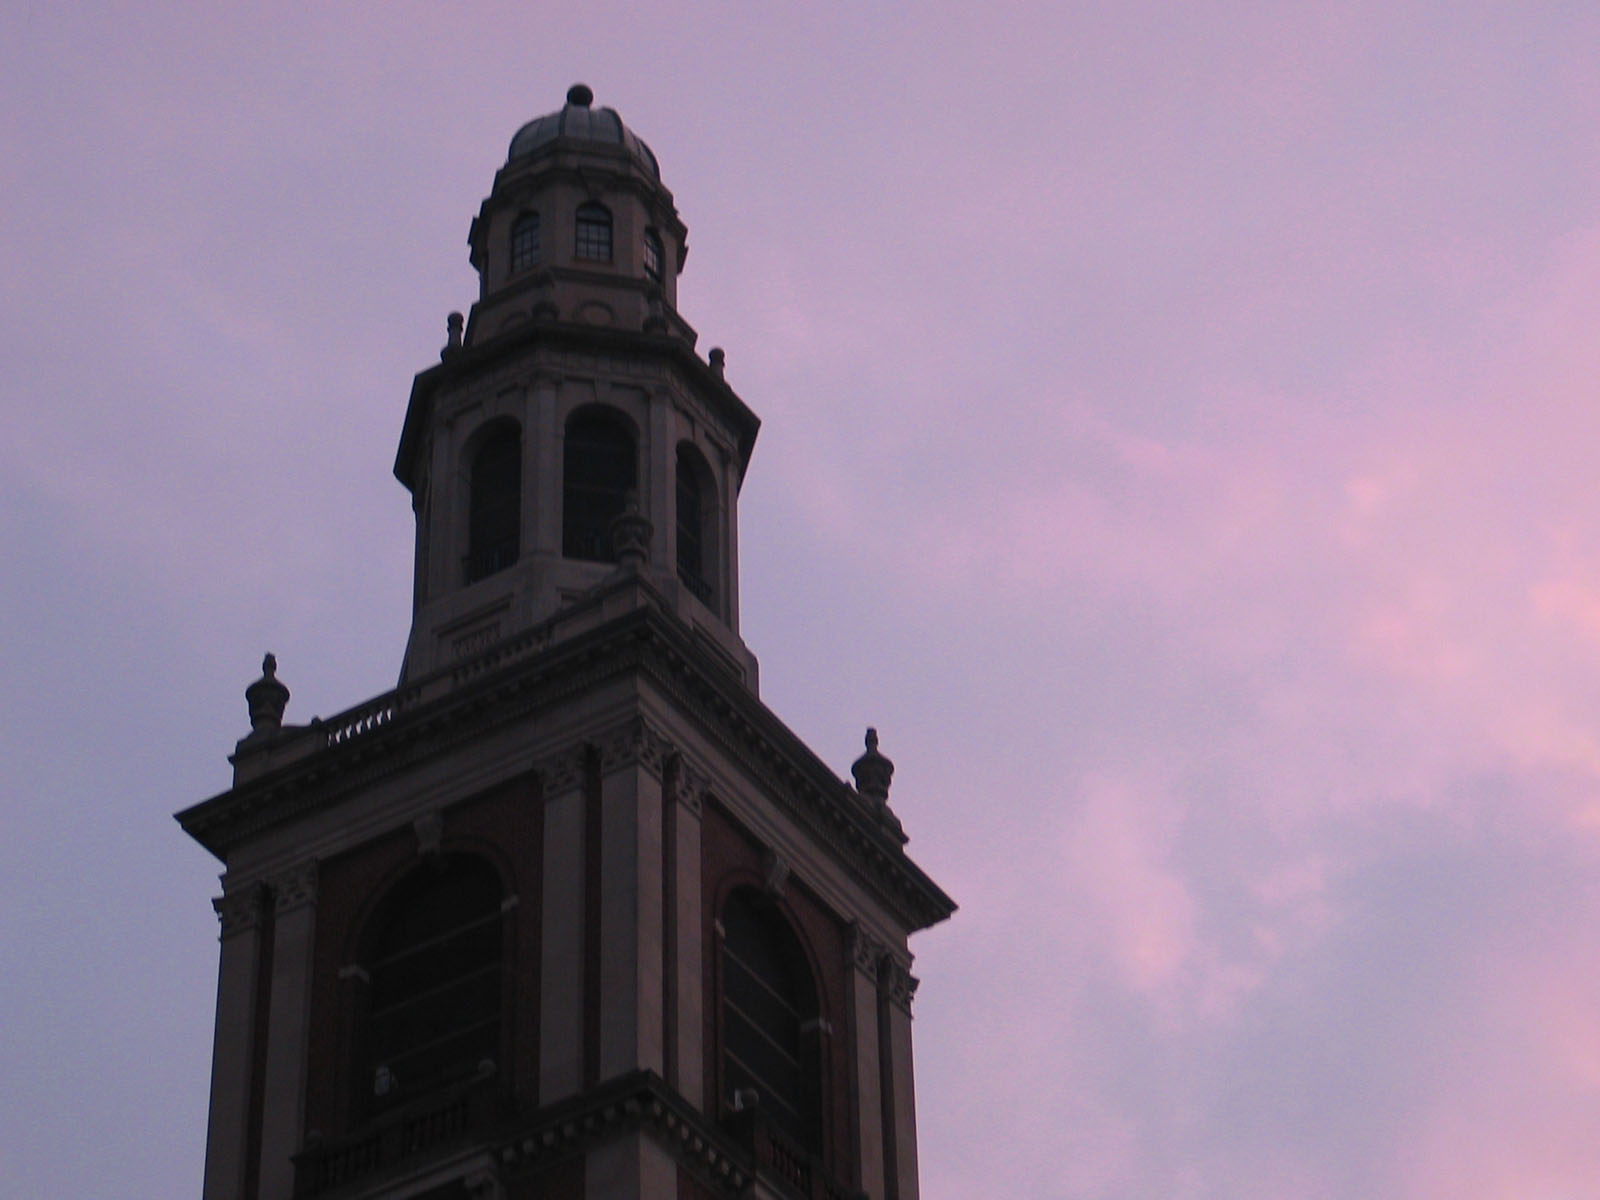 the clock tower shows five minutes after sunset